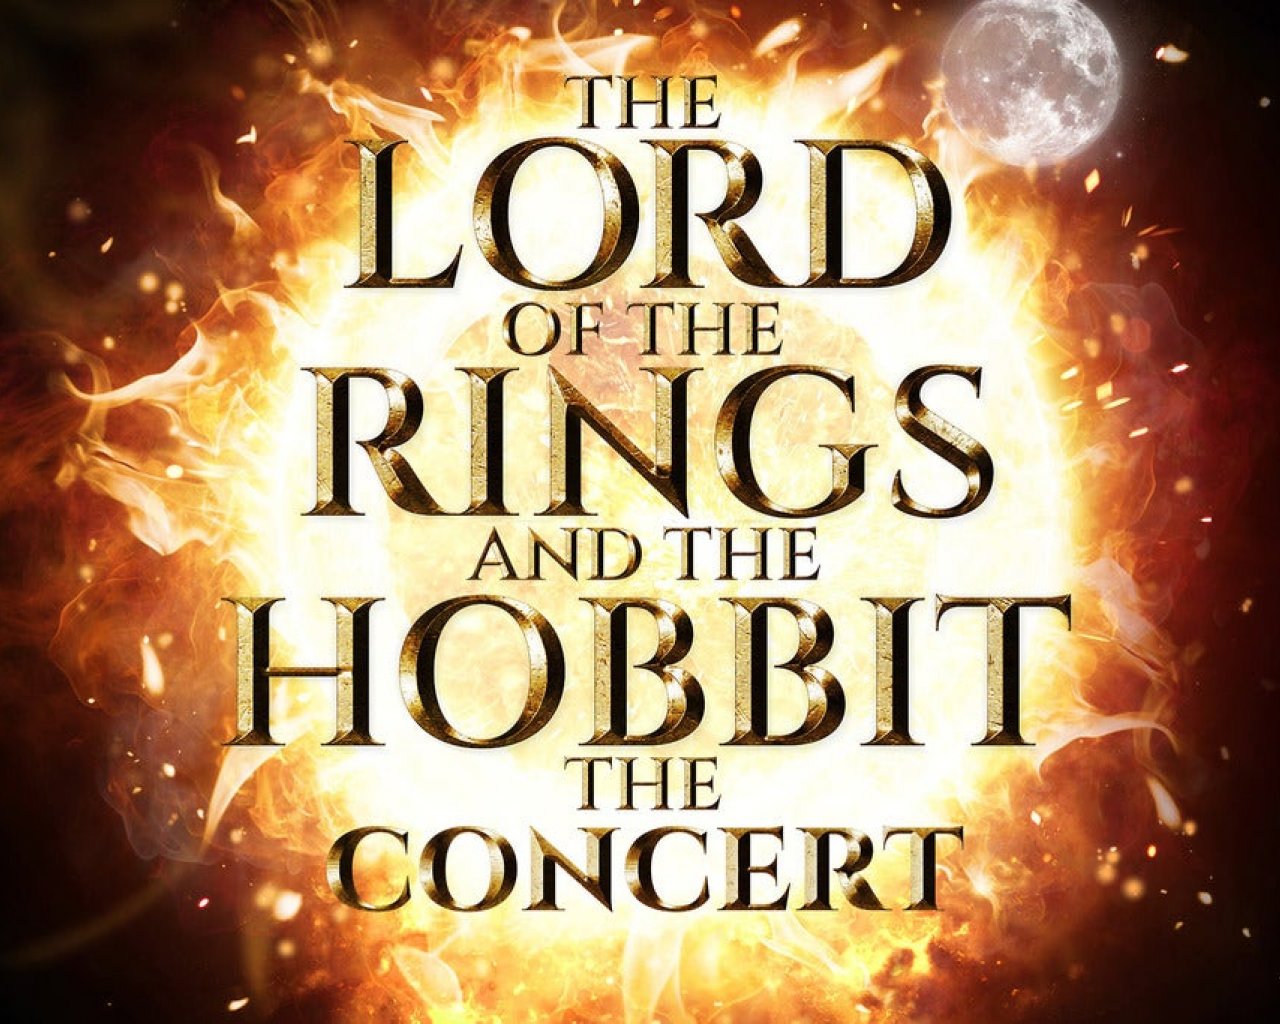 The Lord of The Rings and The Hobbit: The Concert